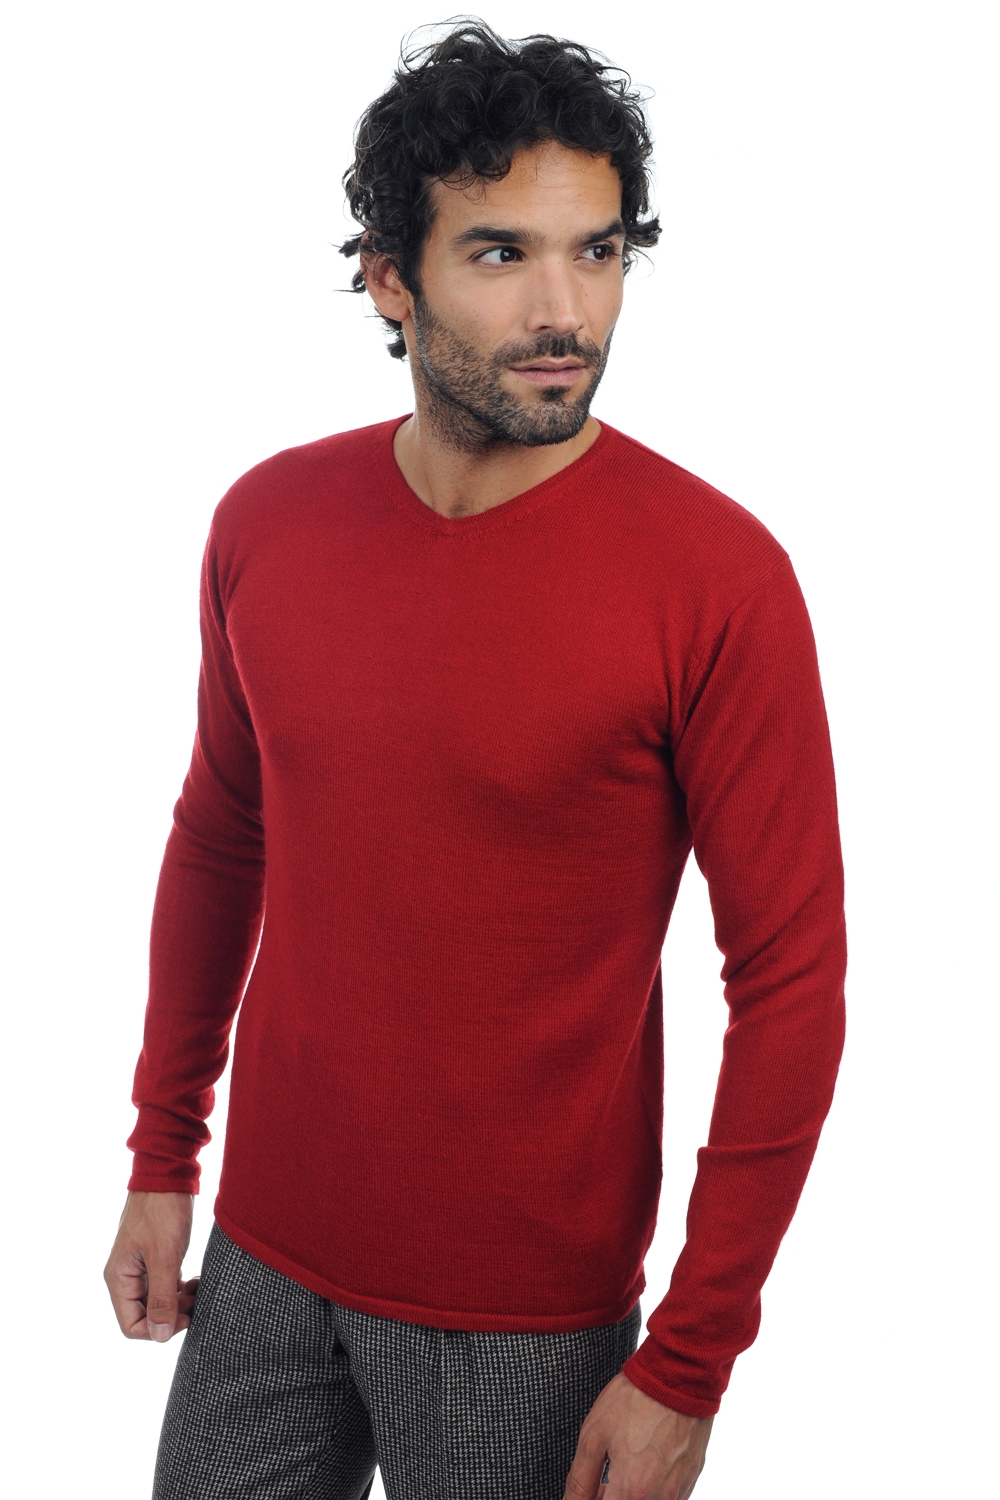 Baby Alpaga pull homme ethan rouge xs